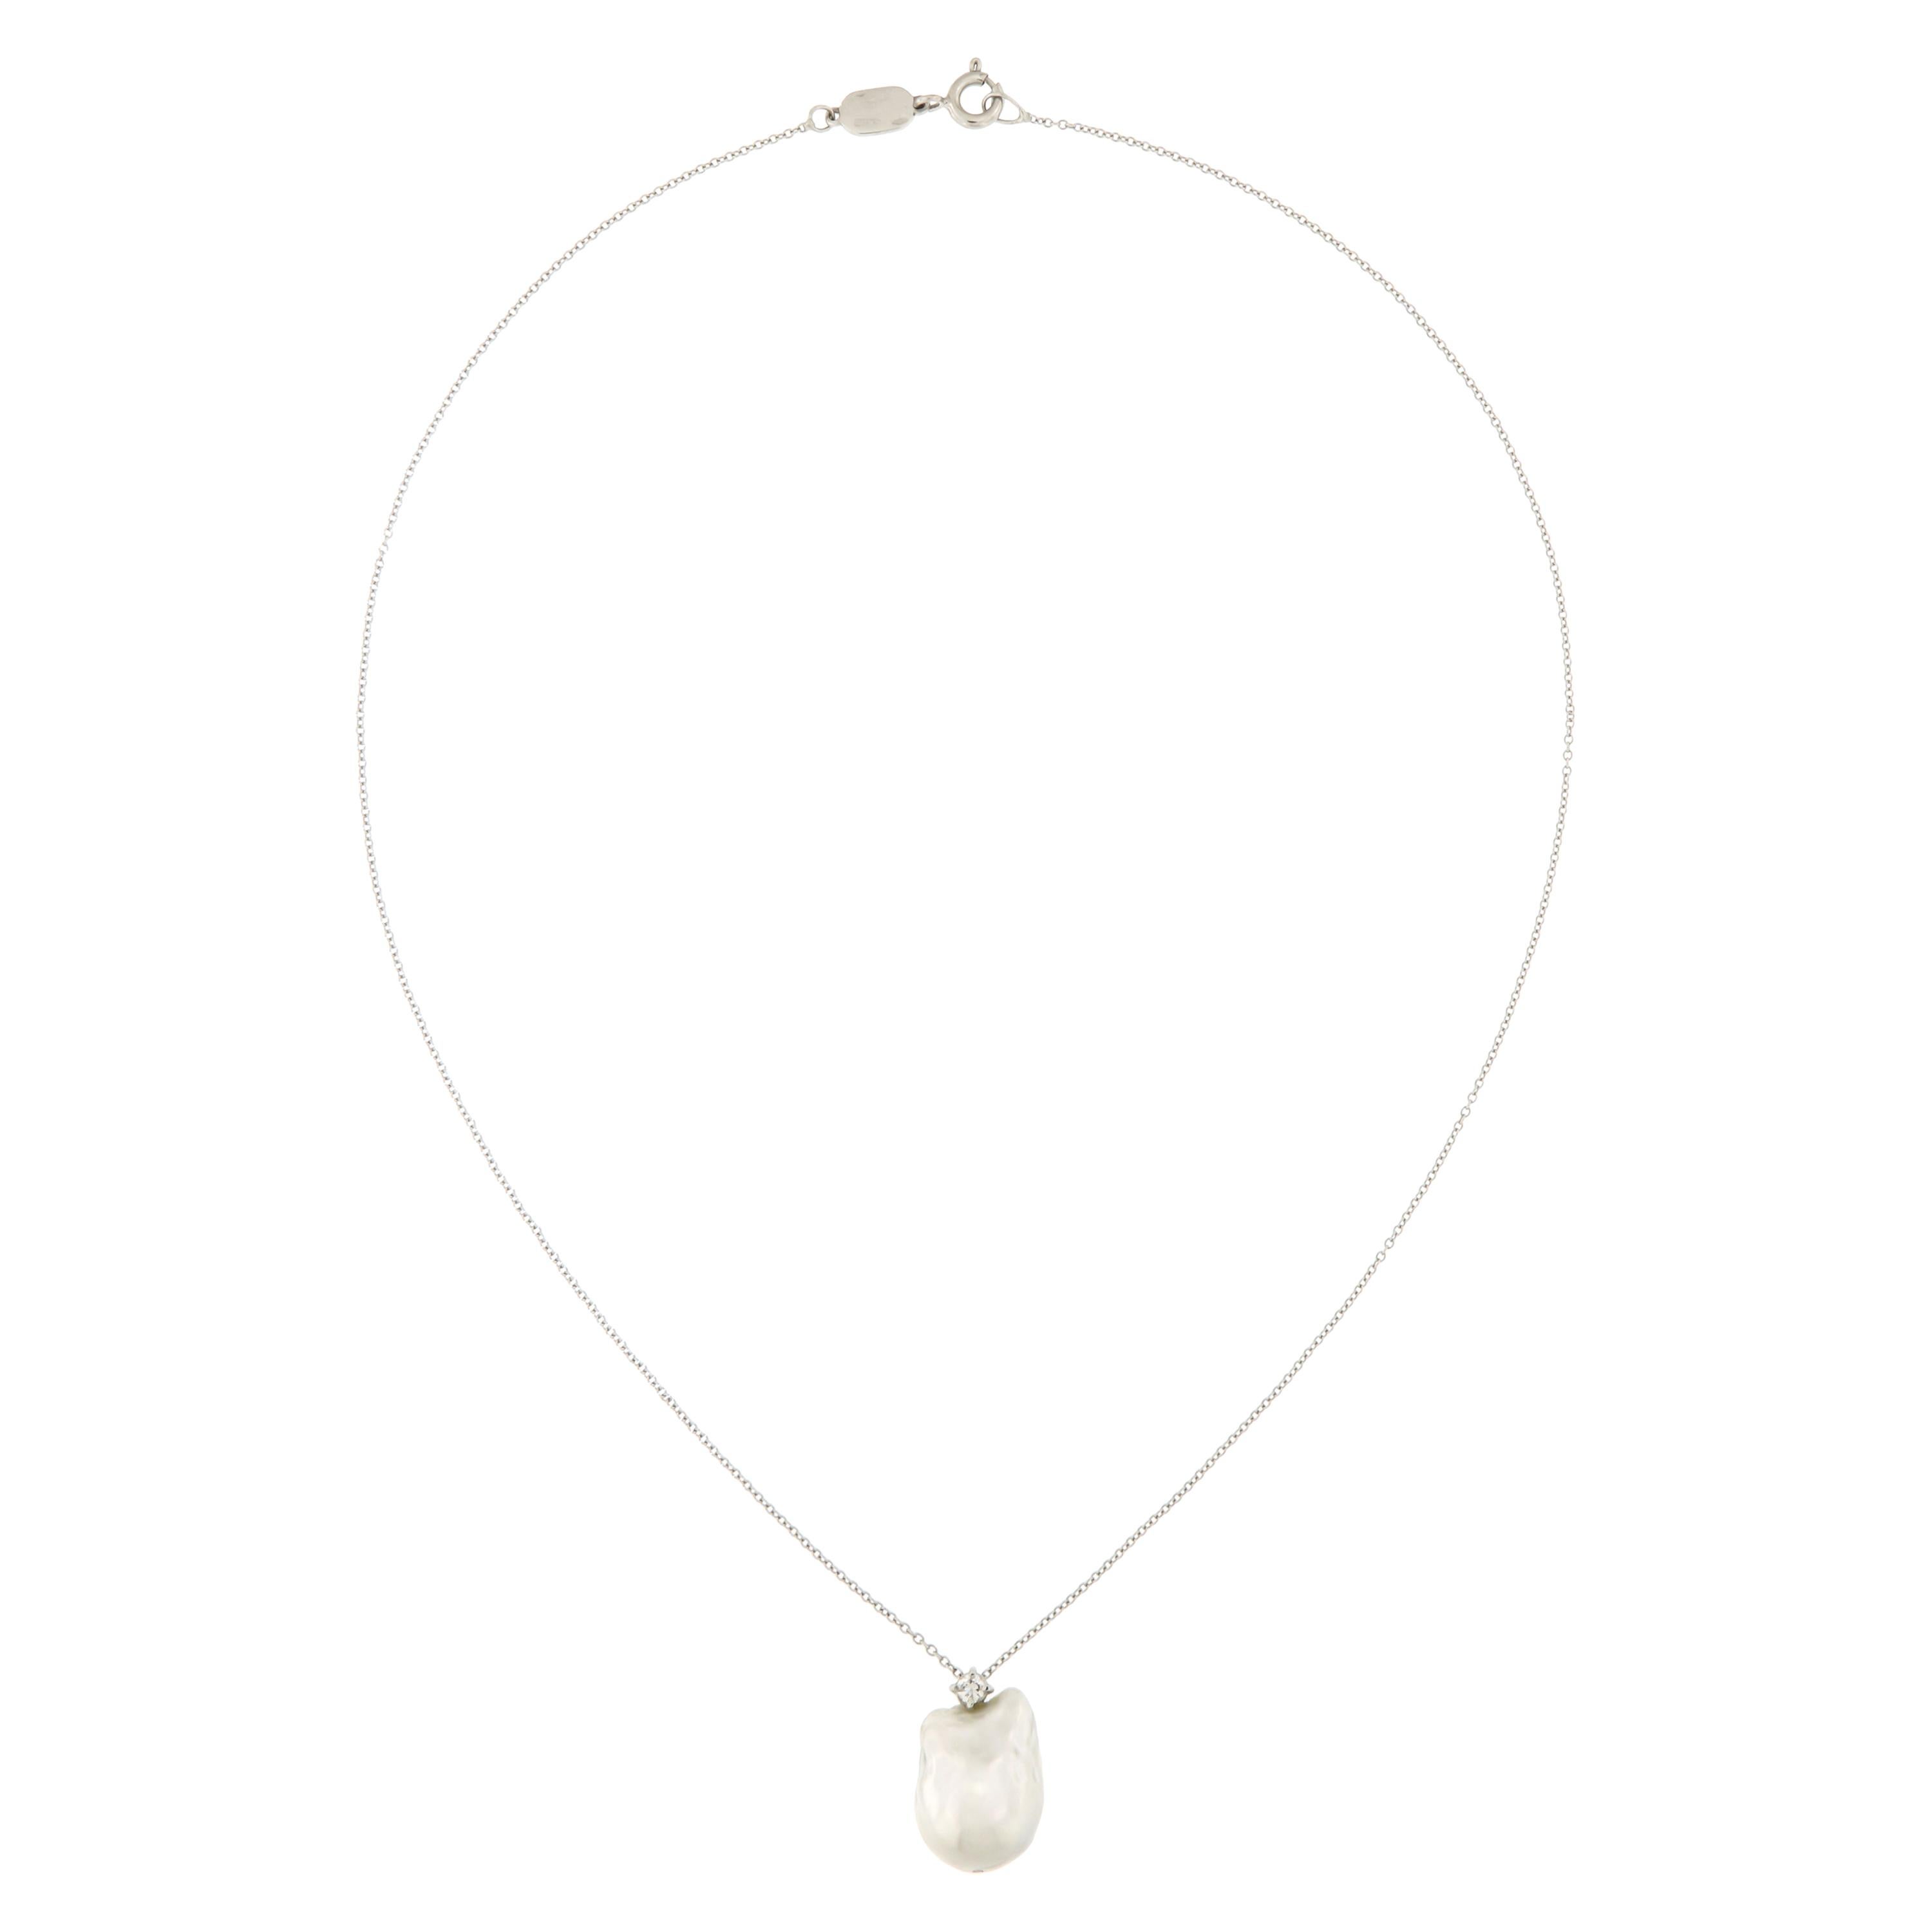 Diamonds Pearls White Gold Necklace Handcrafted in Italy by Botta Gioielli